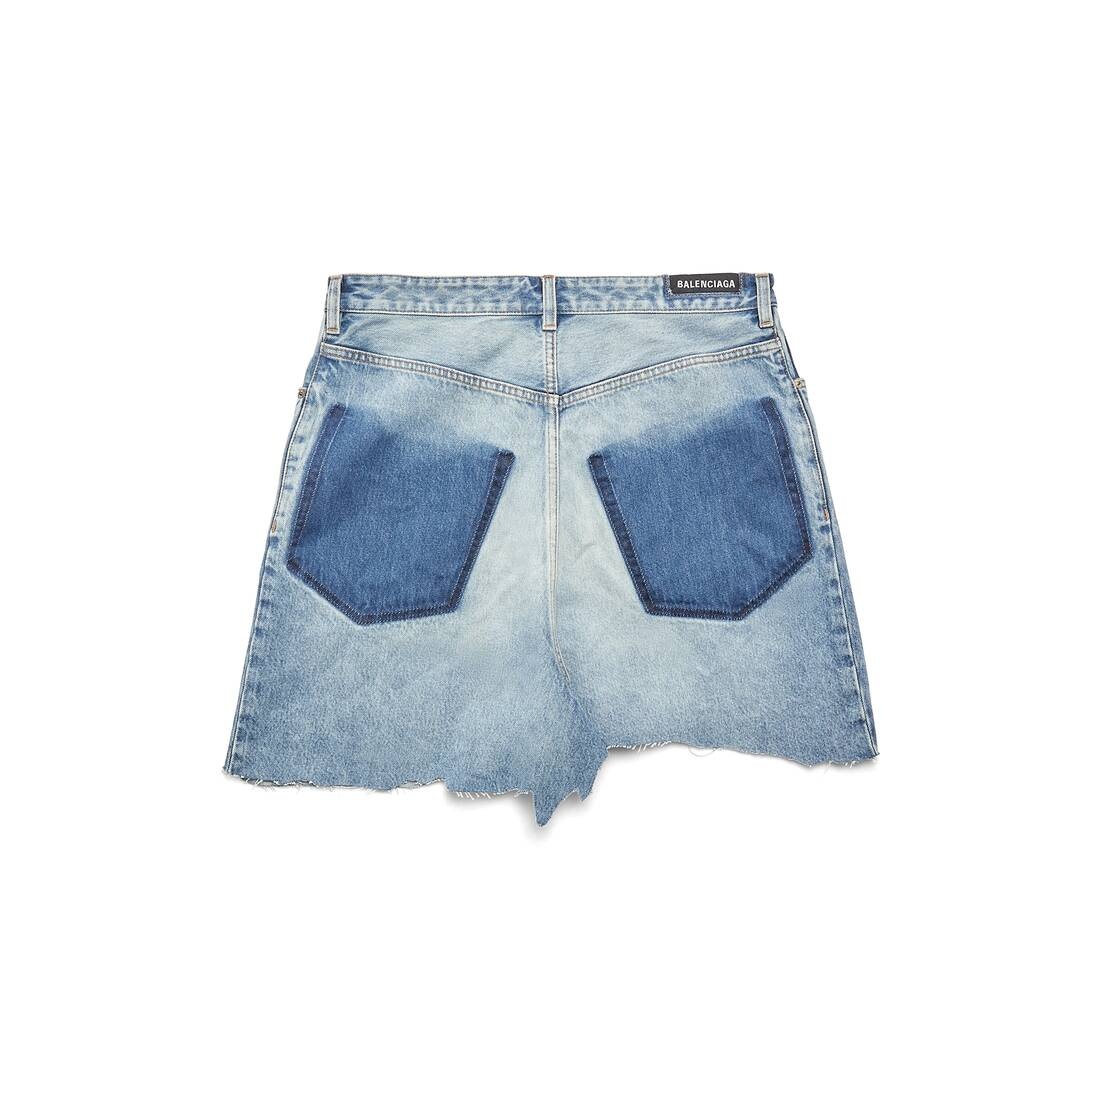 Women's Cut-up Patched Pocket Skirt in Blue - 2